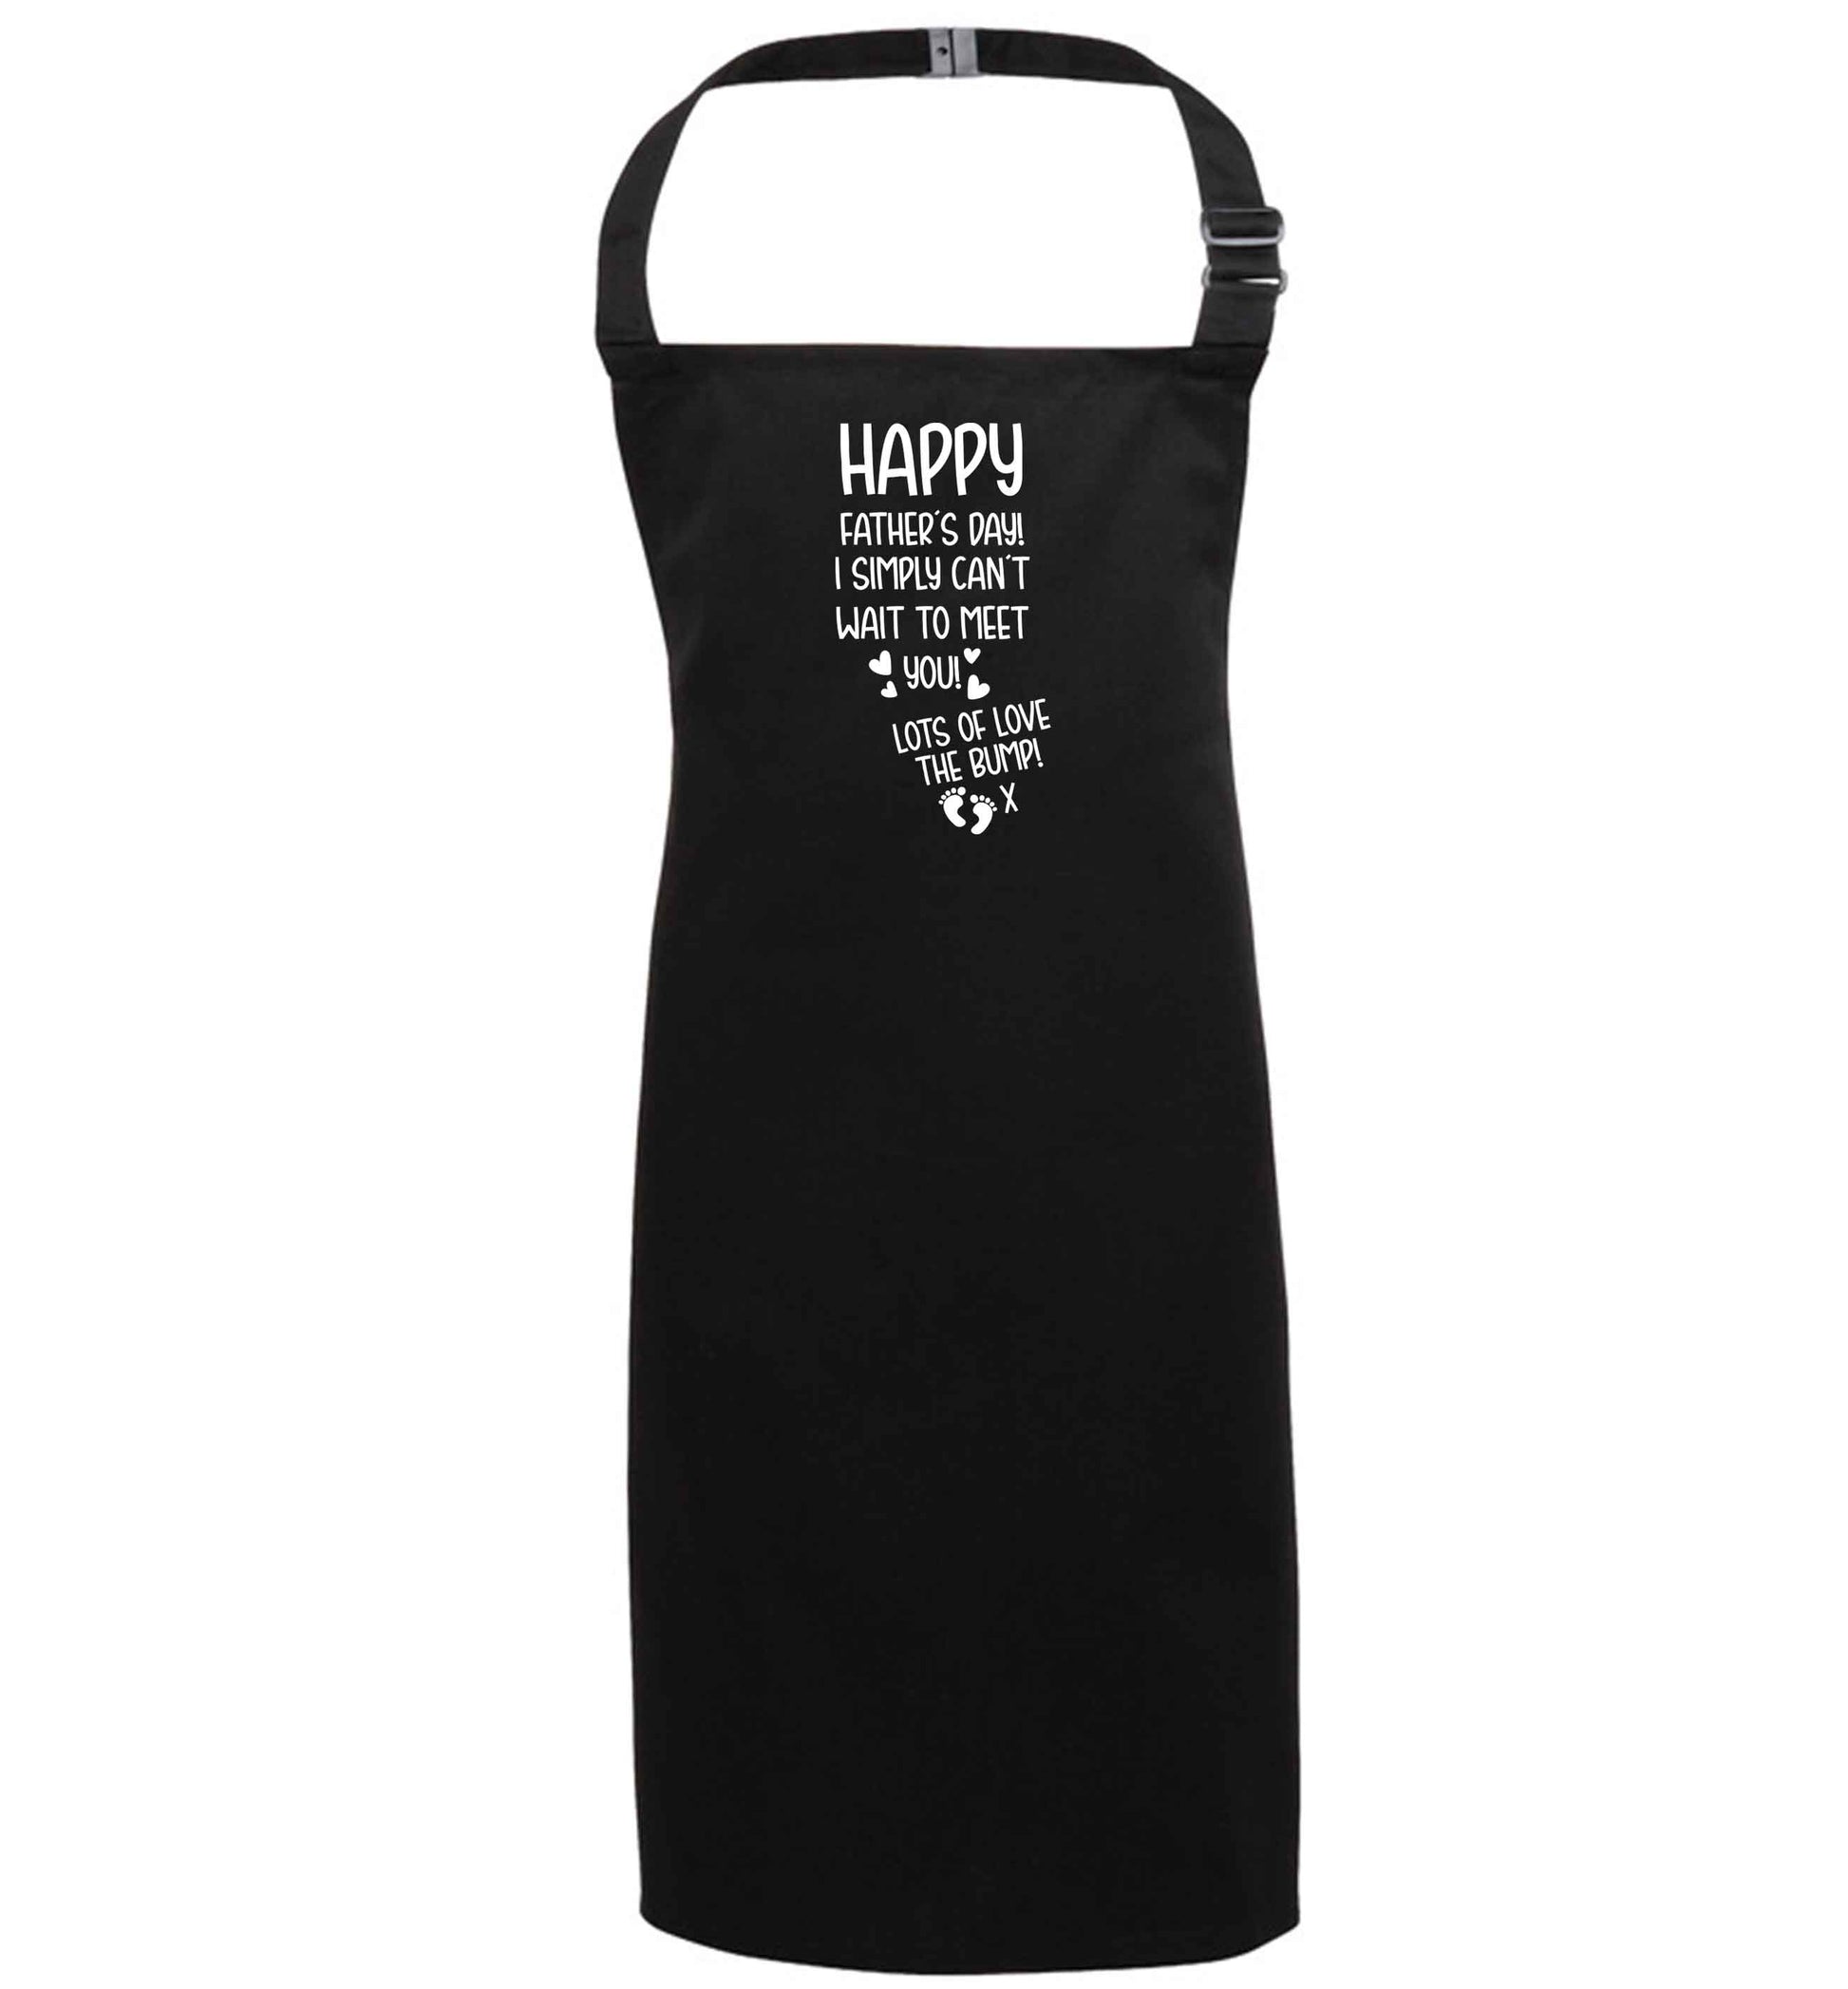 Happy Father's day daddy I can't wait to meet you lot's of love the bump! black apron 7-10 years